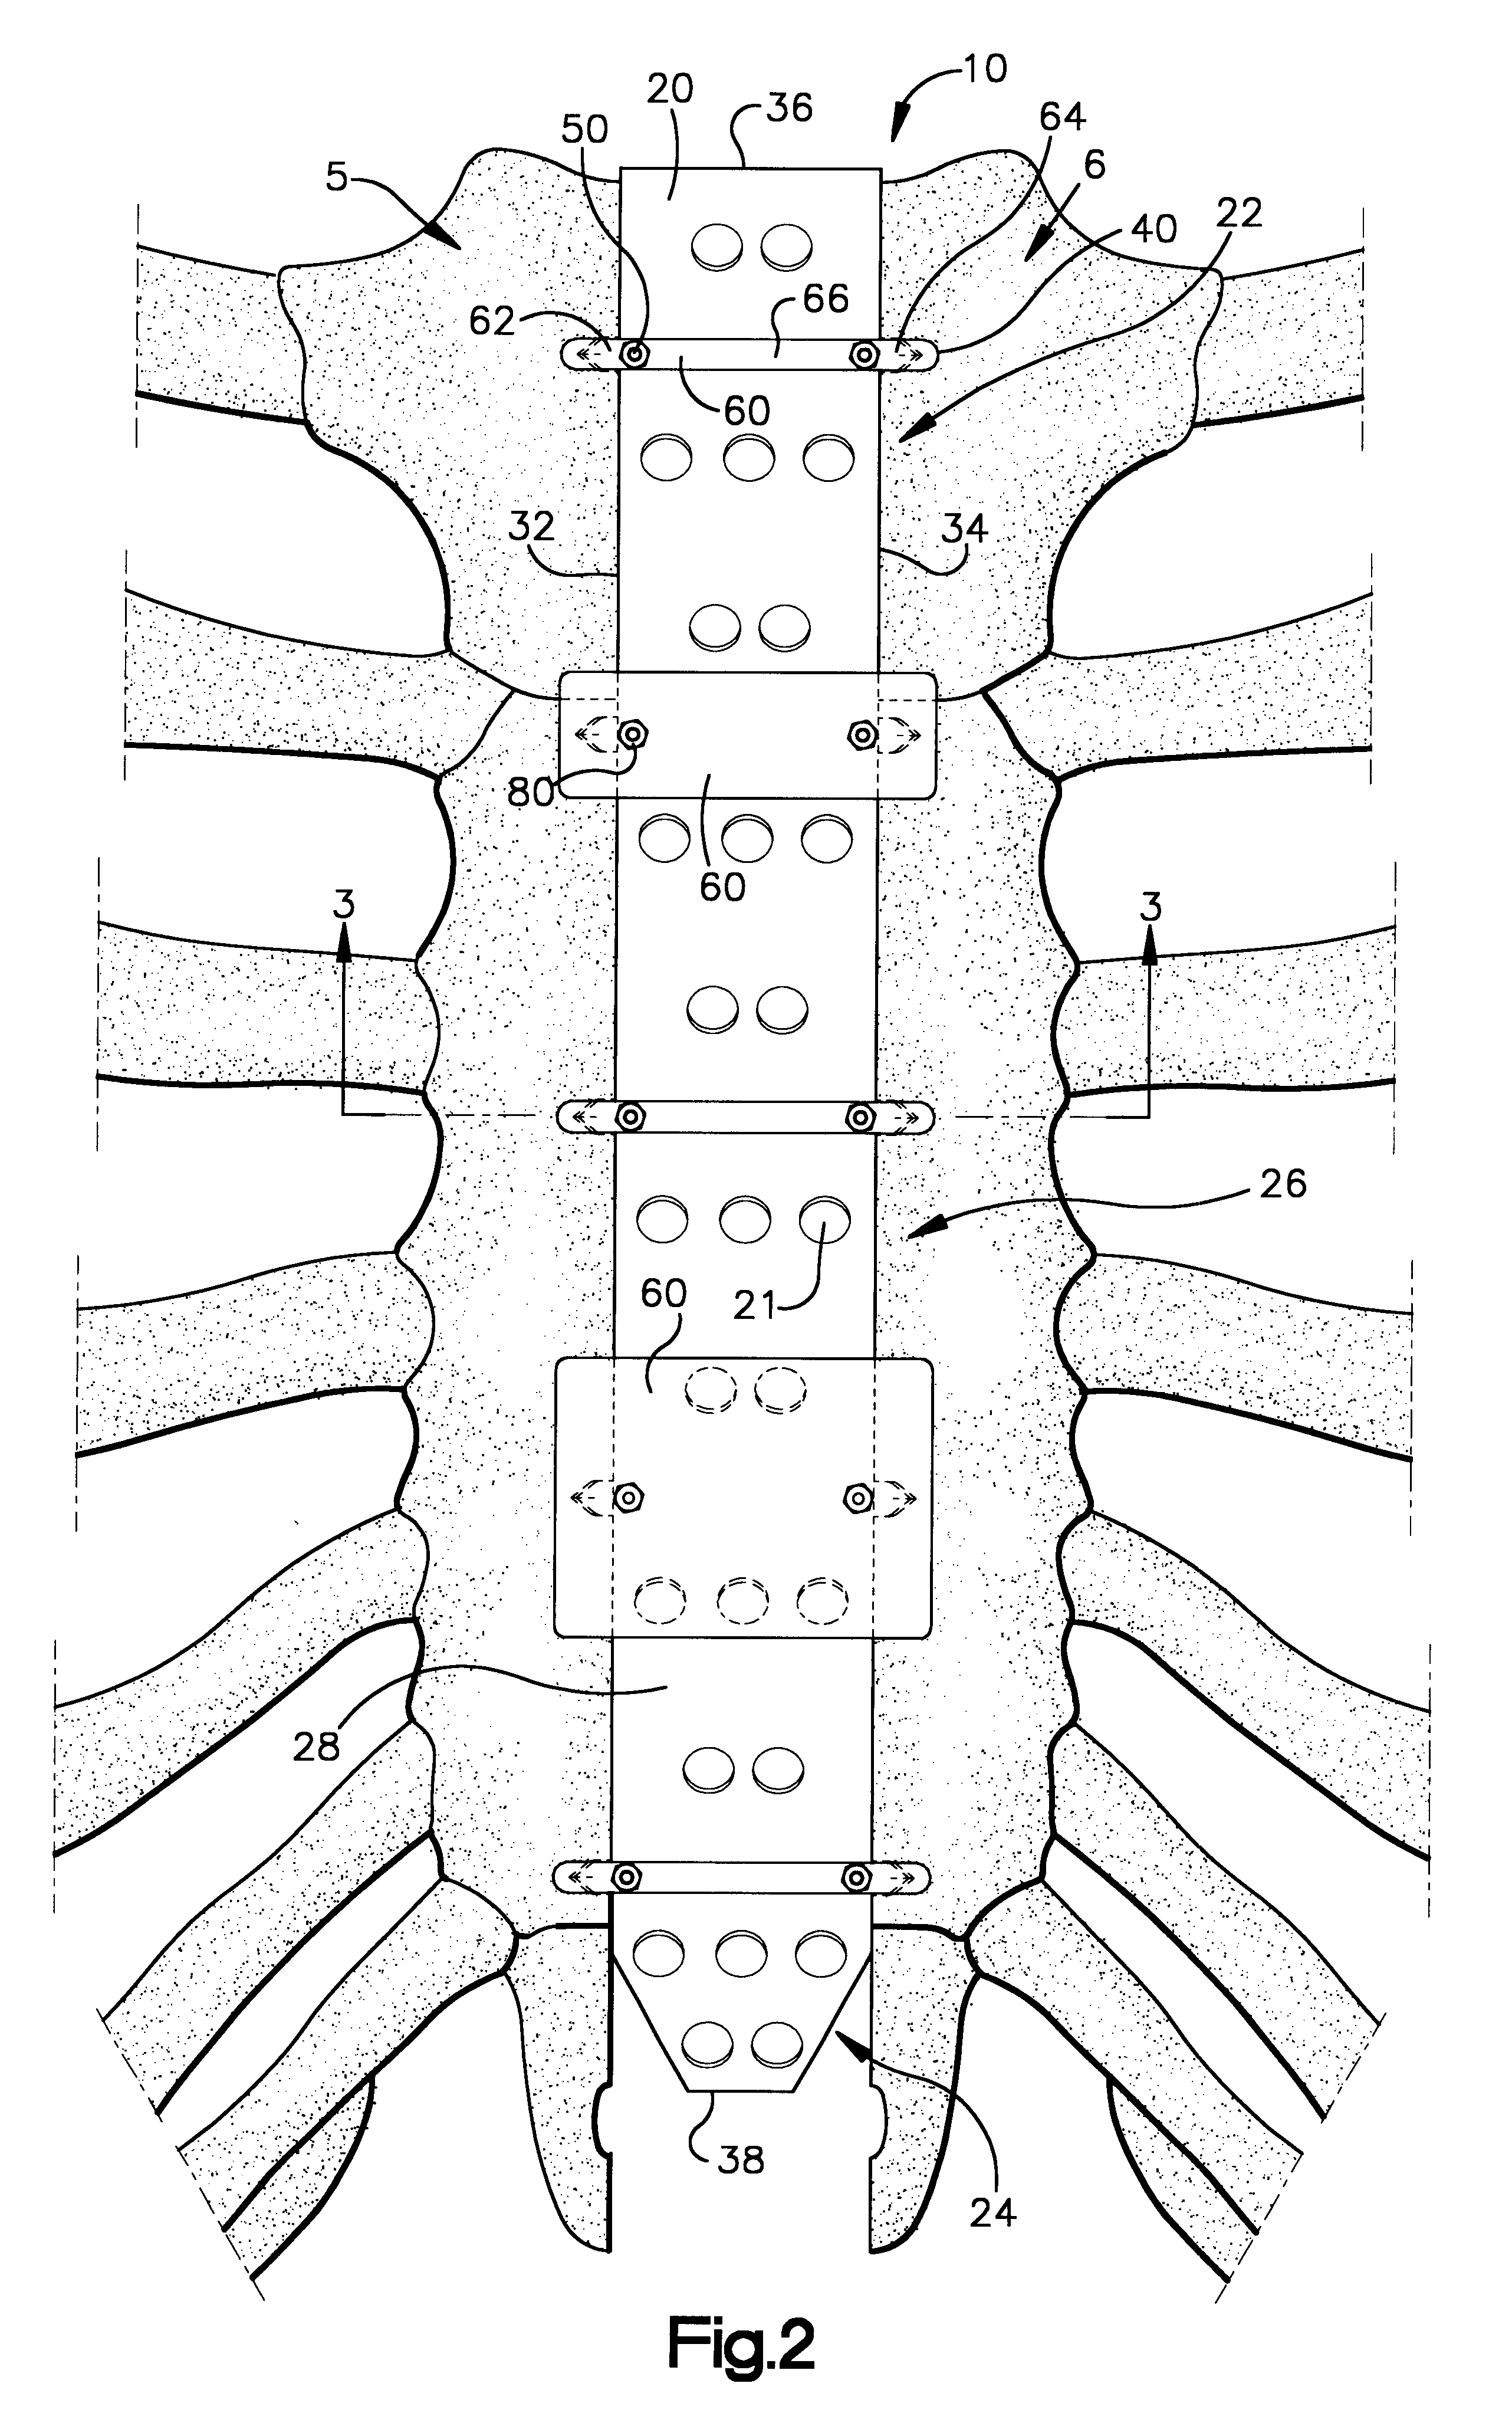 Sternum closure apparatus and method for helping maintain a space between parts of the sternum